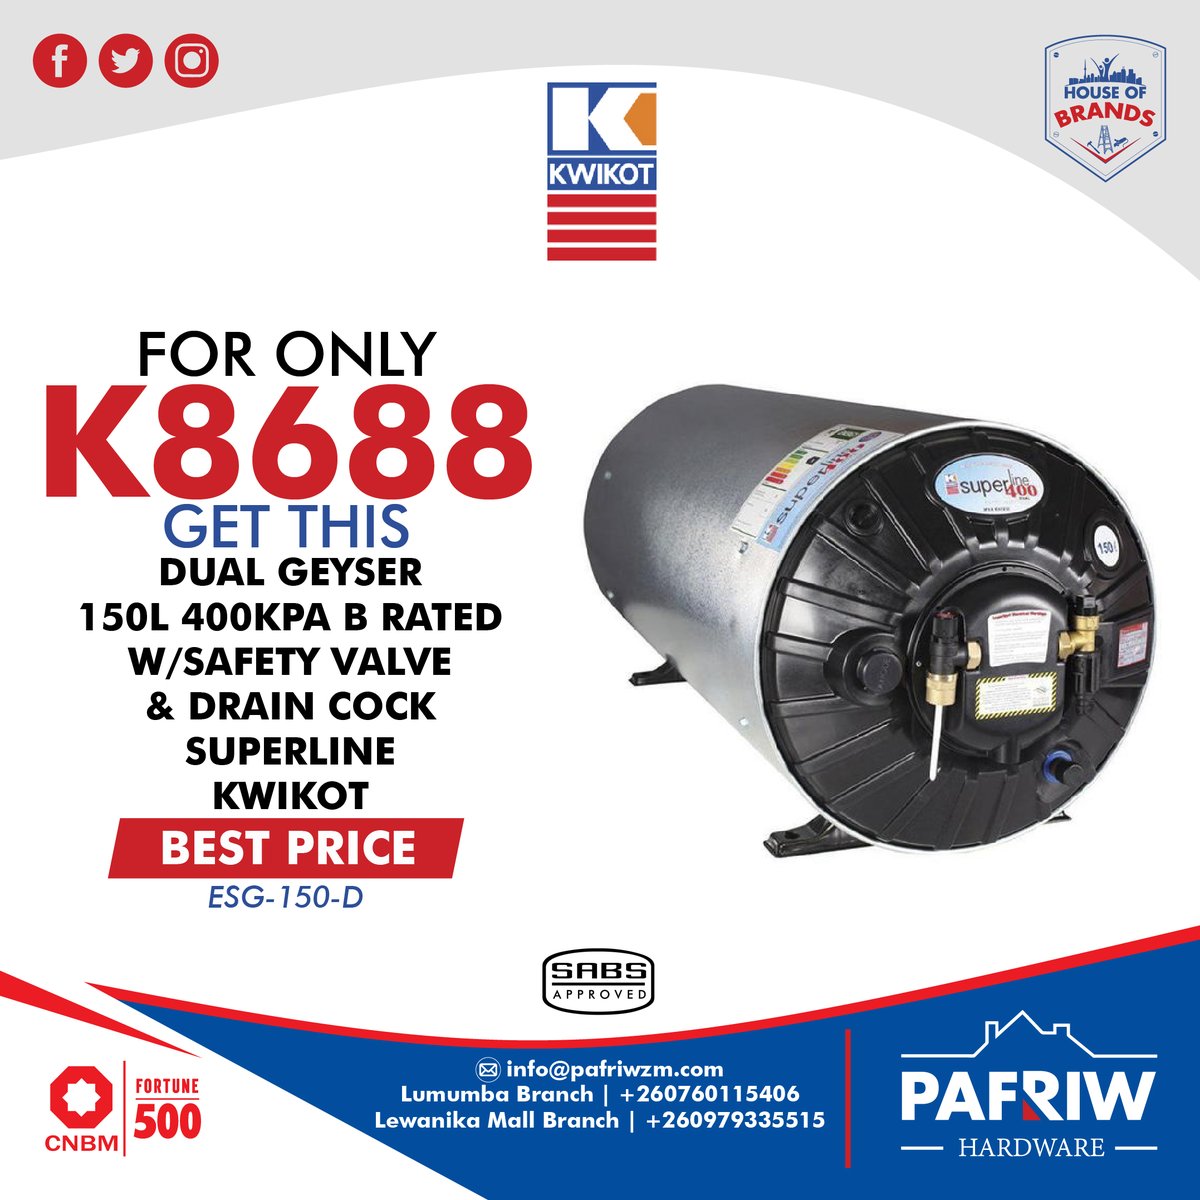 #WaterGeyser 
For as low as K3299, get a high-quality 100L #water #geyser at any of our stores today and Stock Up! 🥳
For orders and inquiries contact us on:
+260760115406 (Lumumba) | +260979335515 (Lewanika Mall)
#PafriwHardware #HouseOfBrands #MitengoZachikata